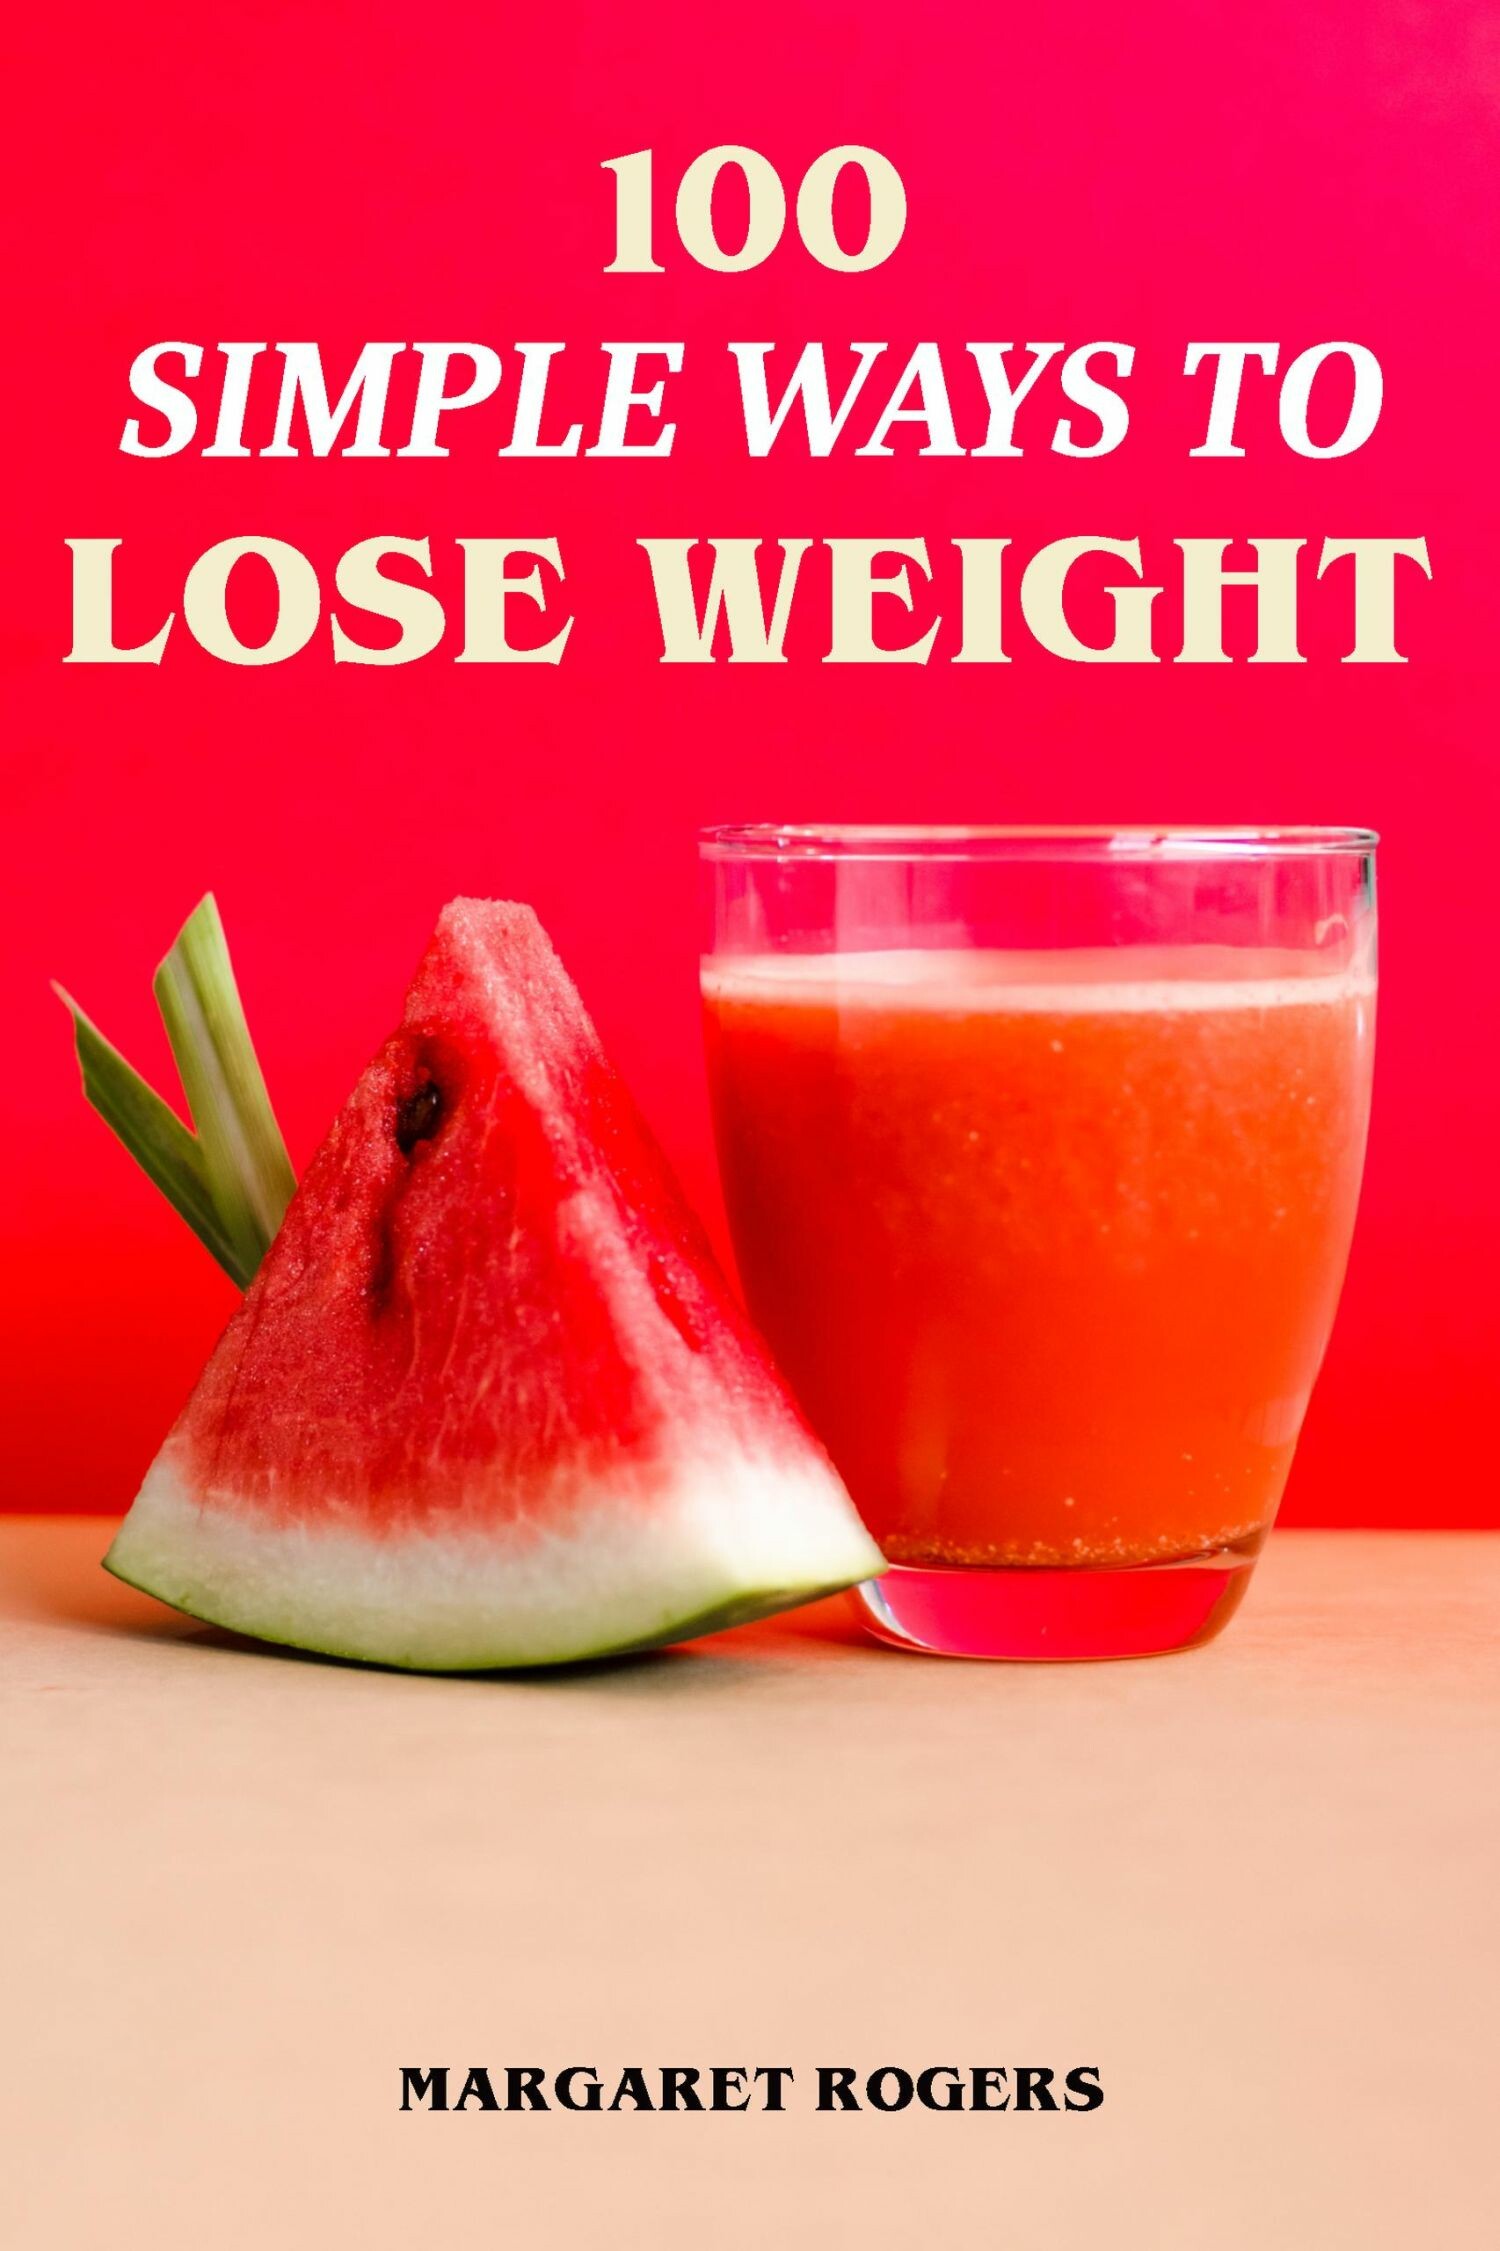 100 Simple Ways to Lose Weight